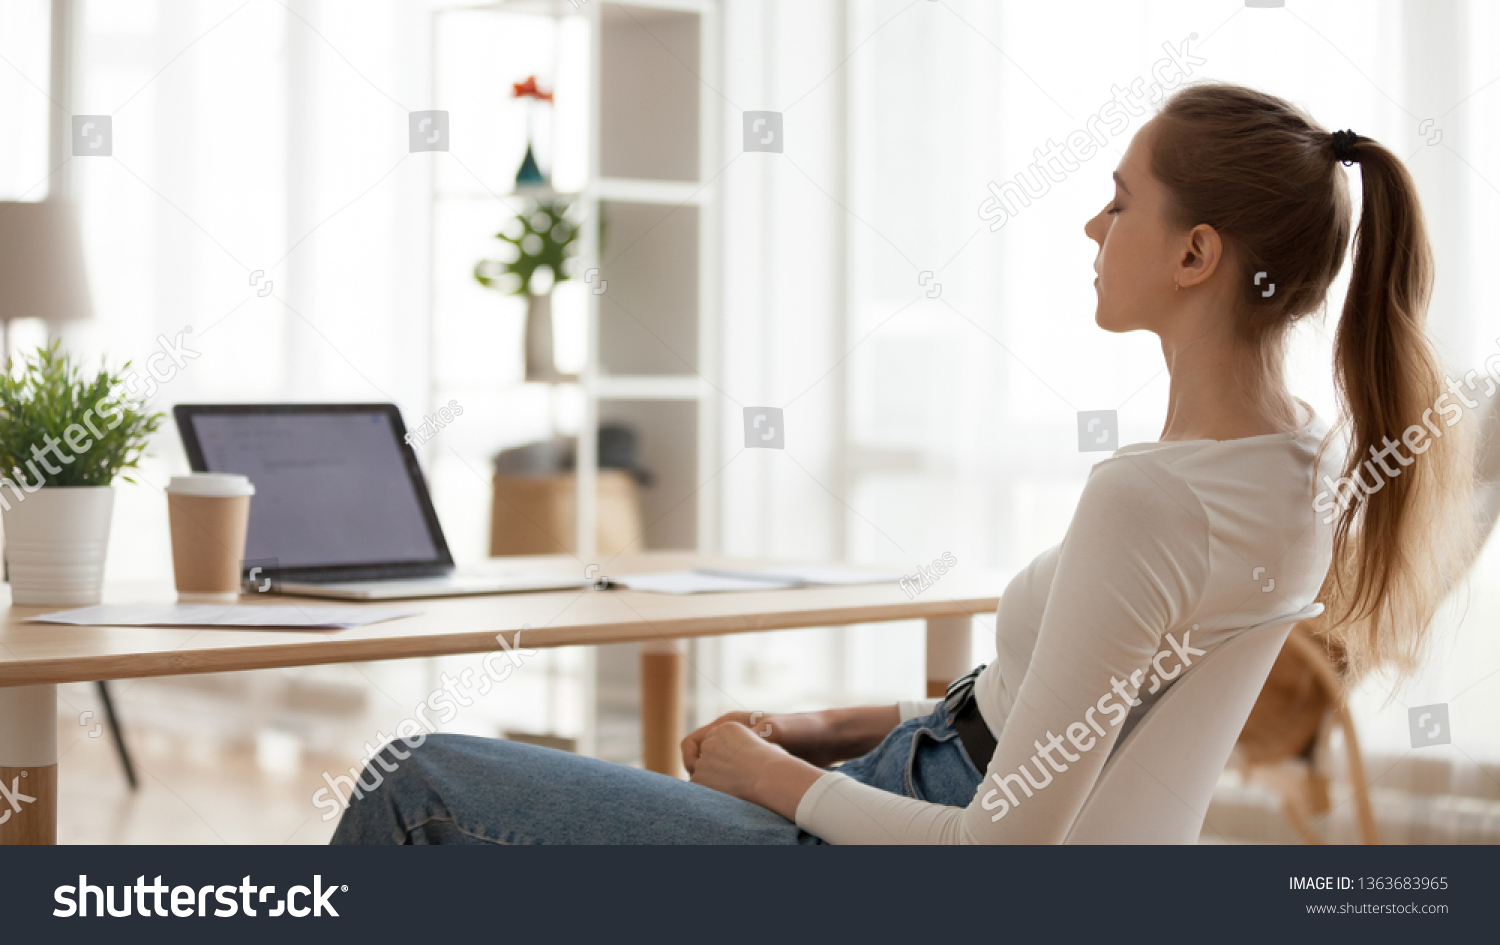 Calm peaceful young woman relaxing in office chair at workplace, tired employee sitting at desk, female student taking break after study, meditating with closed eyes, breathing deep, thinking #1363683965